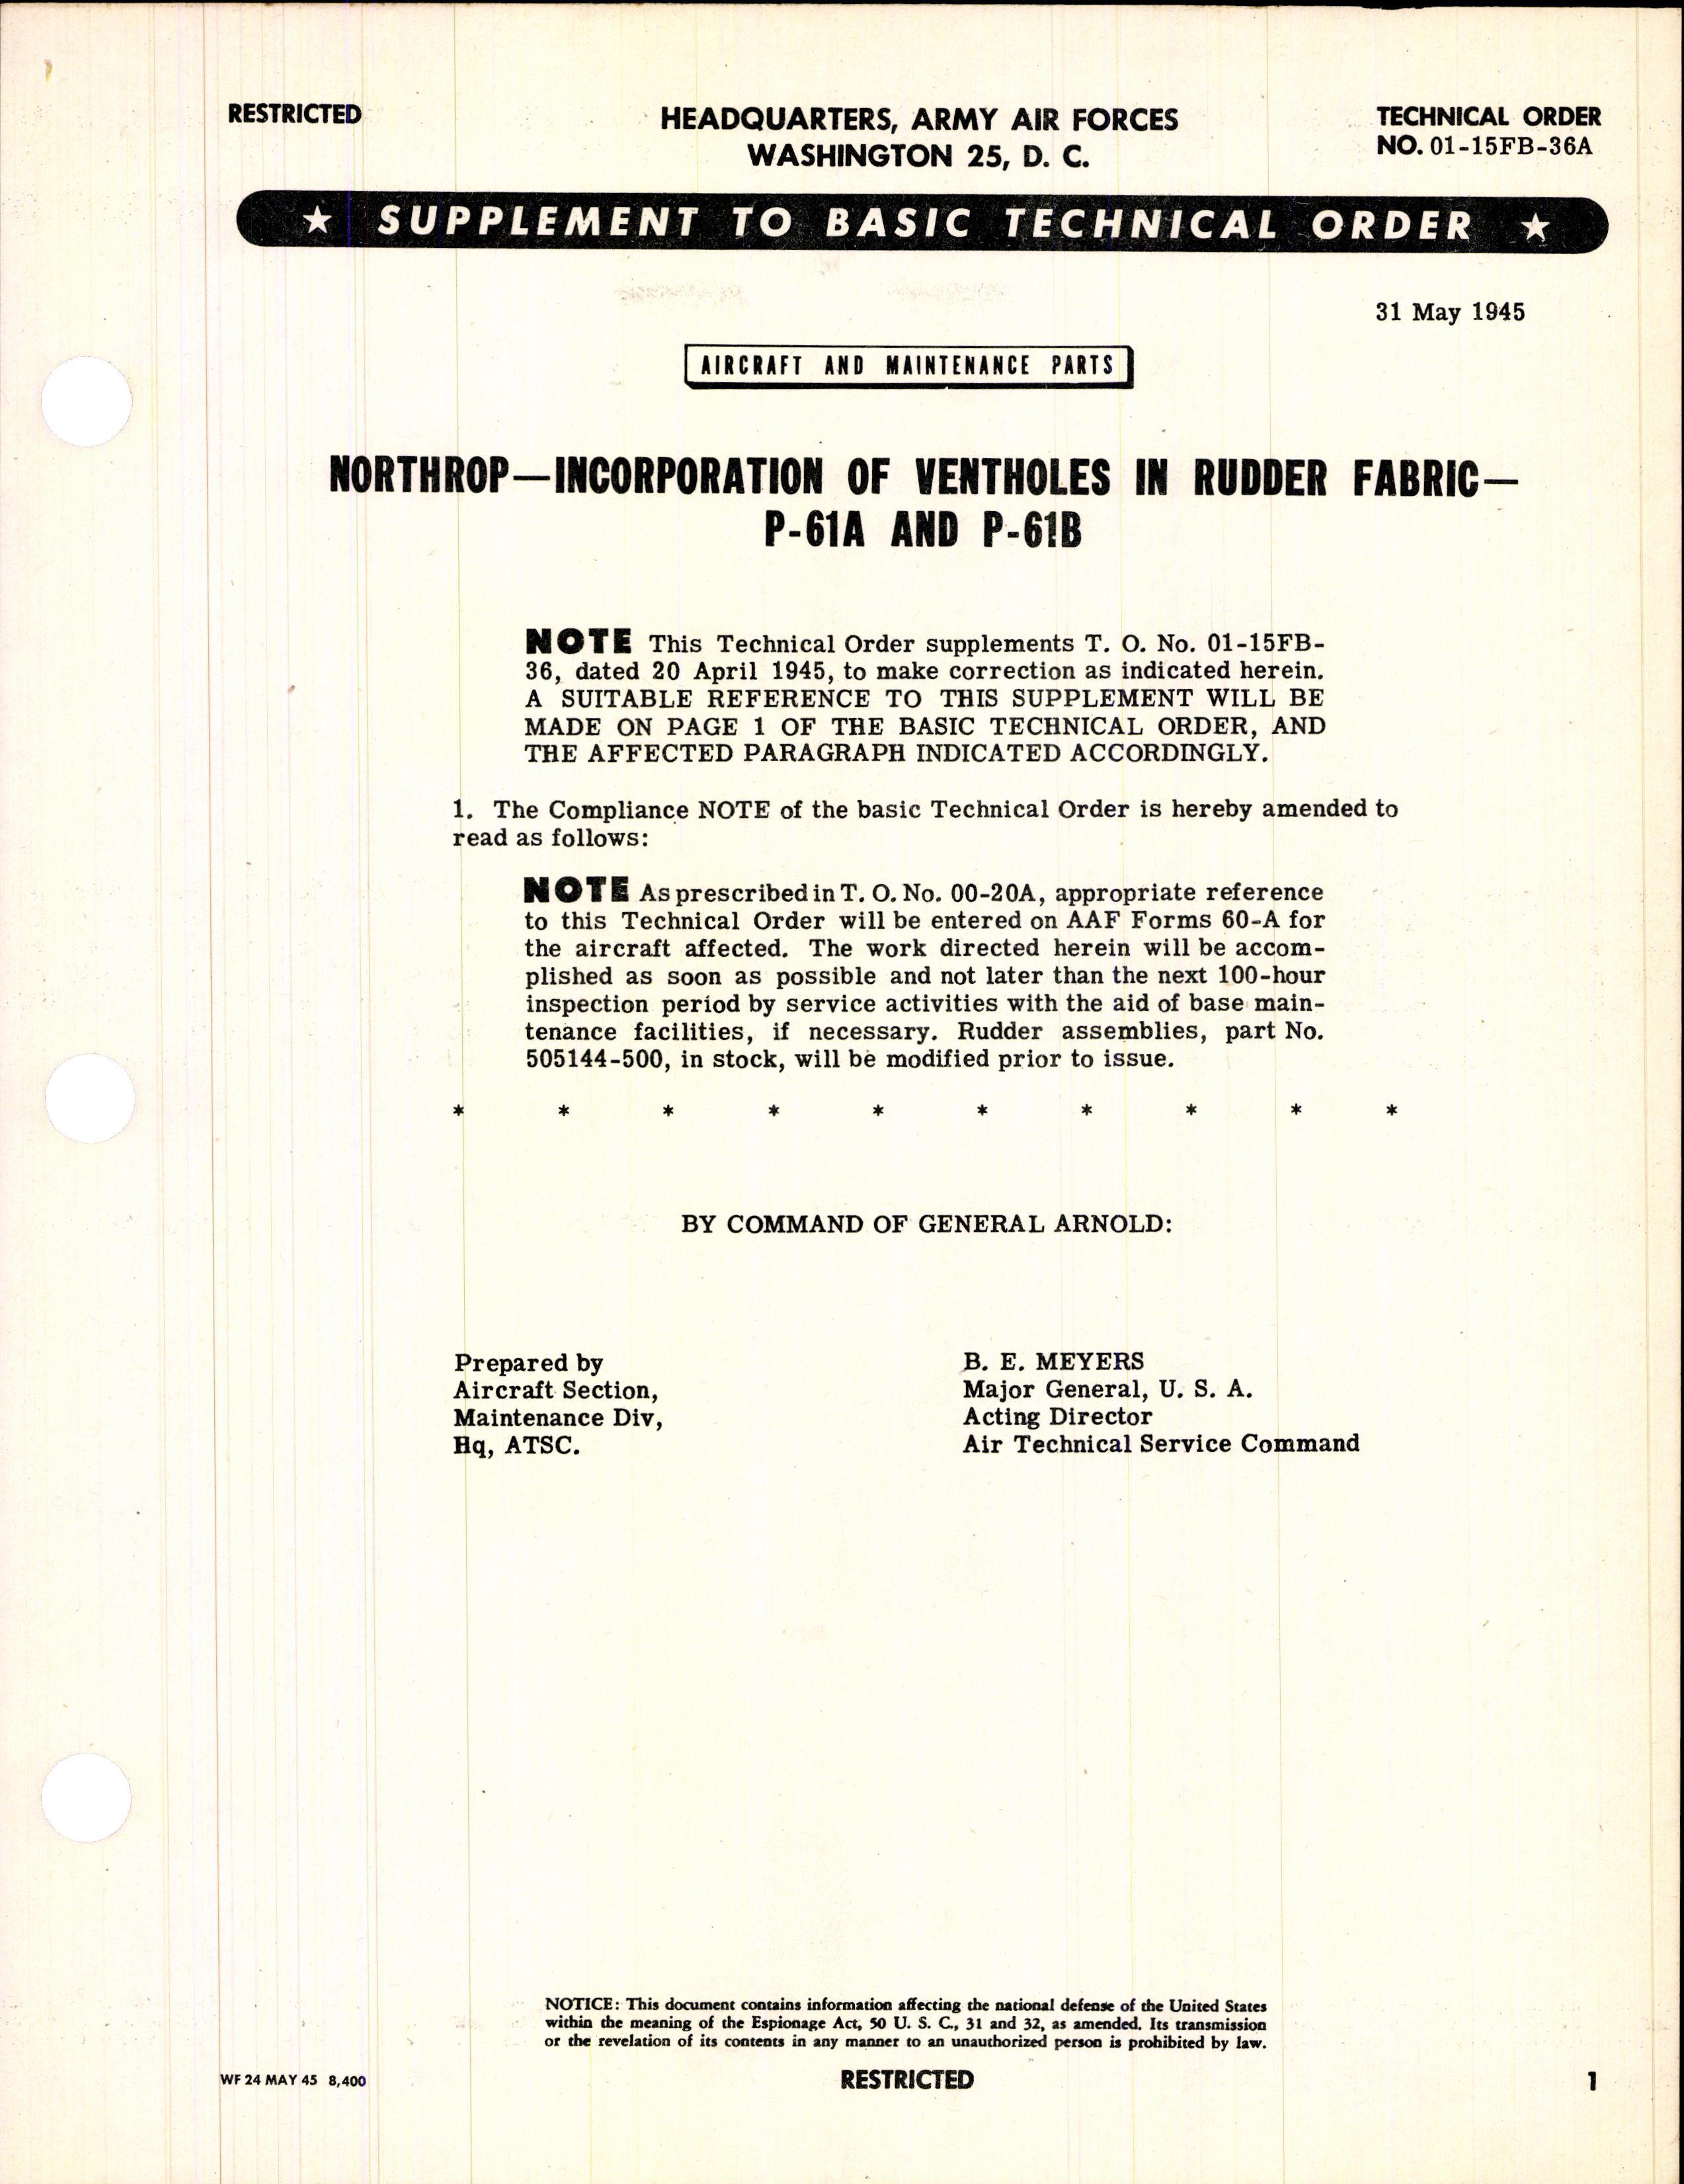 Sample page 1 from AirCorps Library document: Incorporation of Vent Holes in Rudder Fabric for P-61A and P-61B